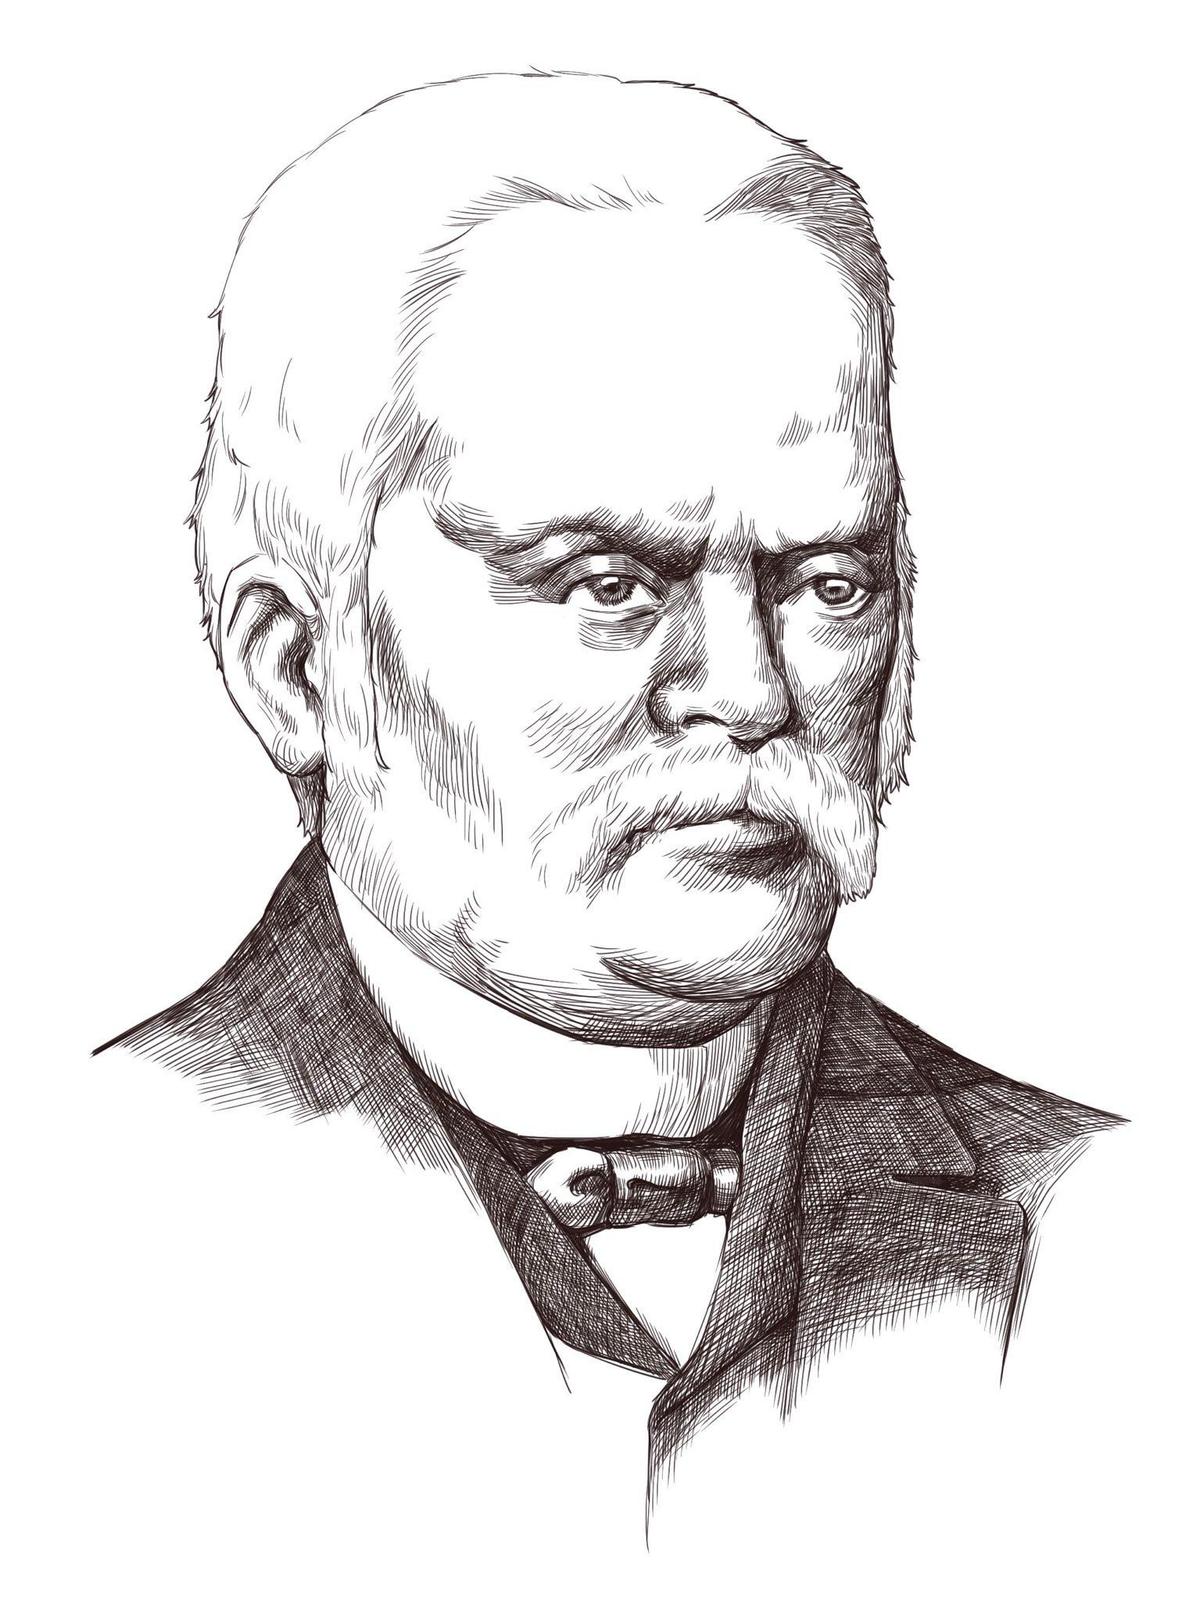 Anthony W. Gardiner (Illustrated by R.W.)